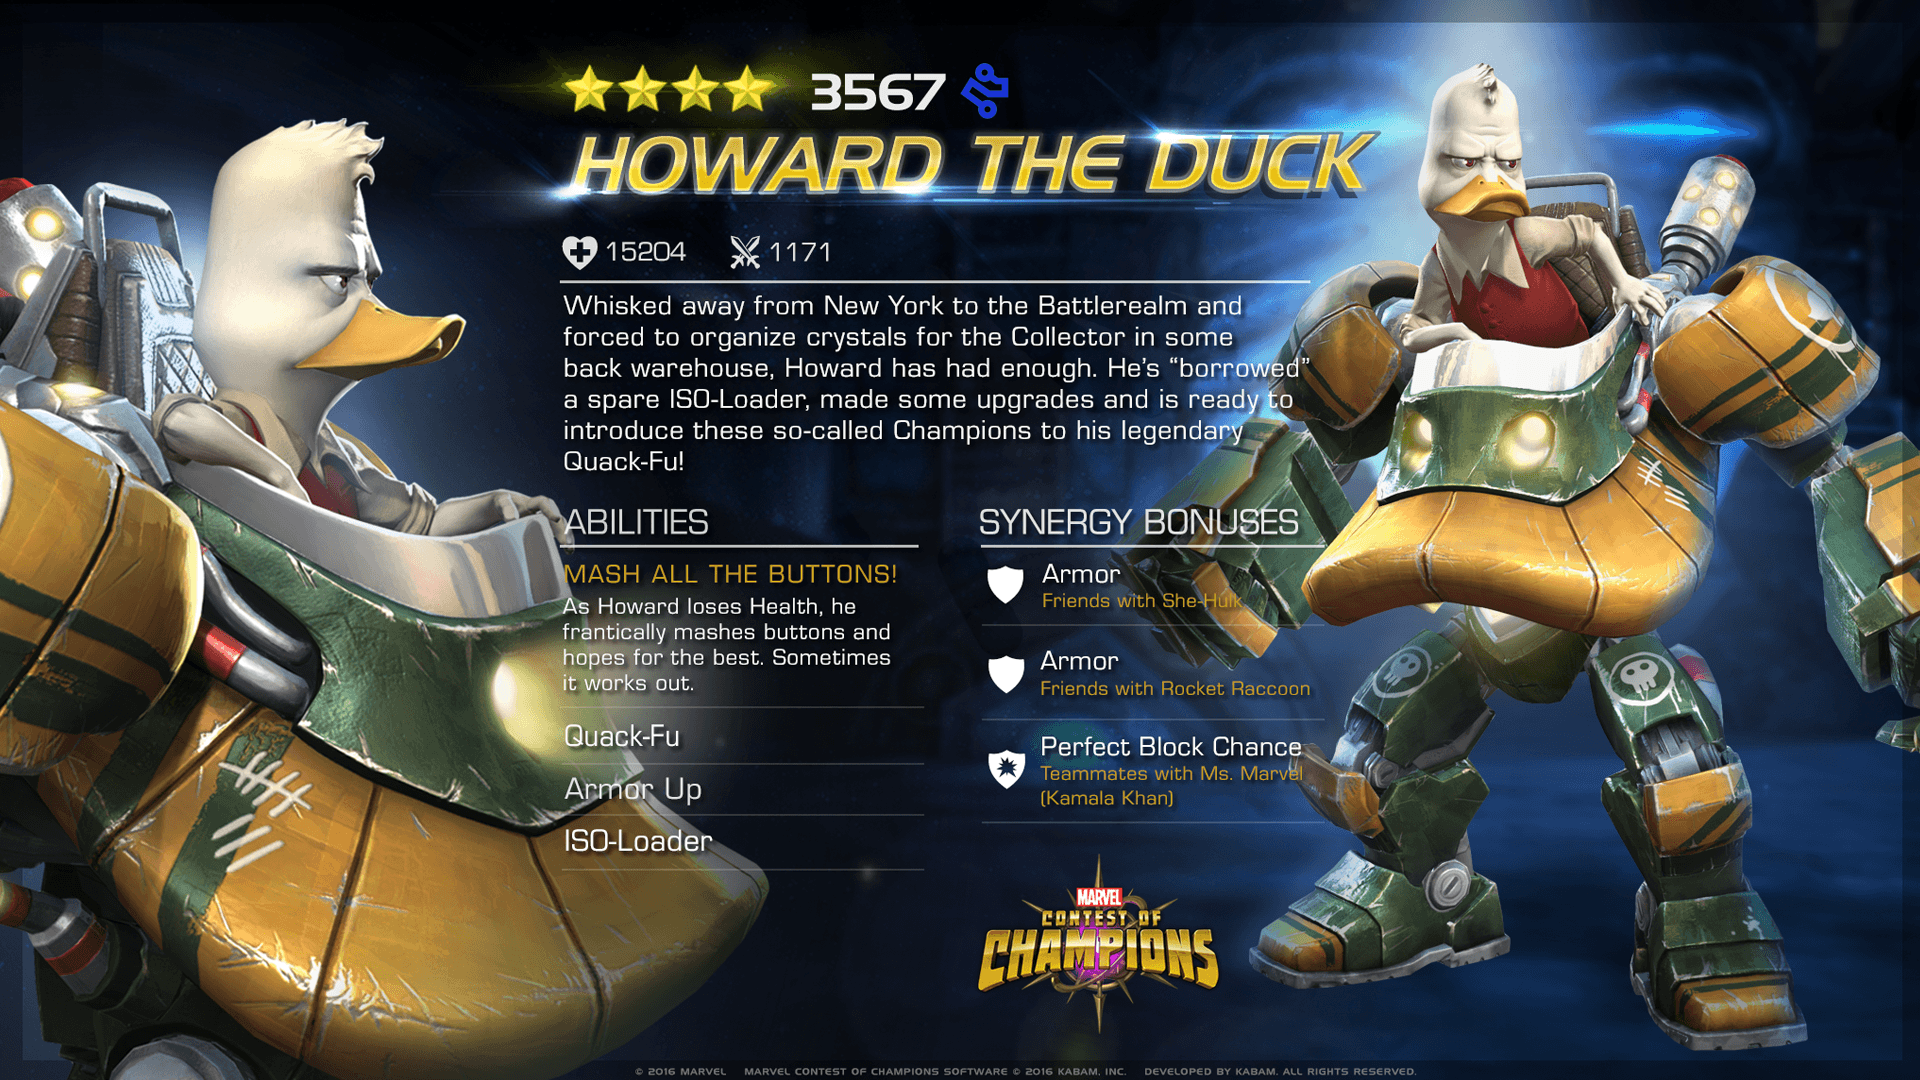 ENTERING MARVEL CONTEST OF CHAMPIONS HOWARD THE DUCK